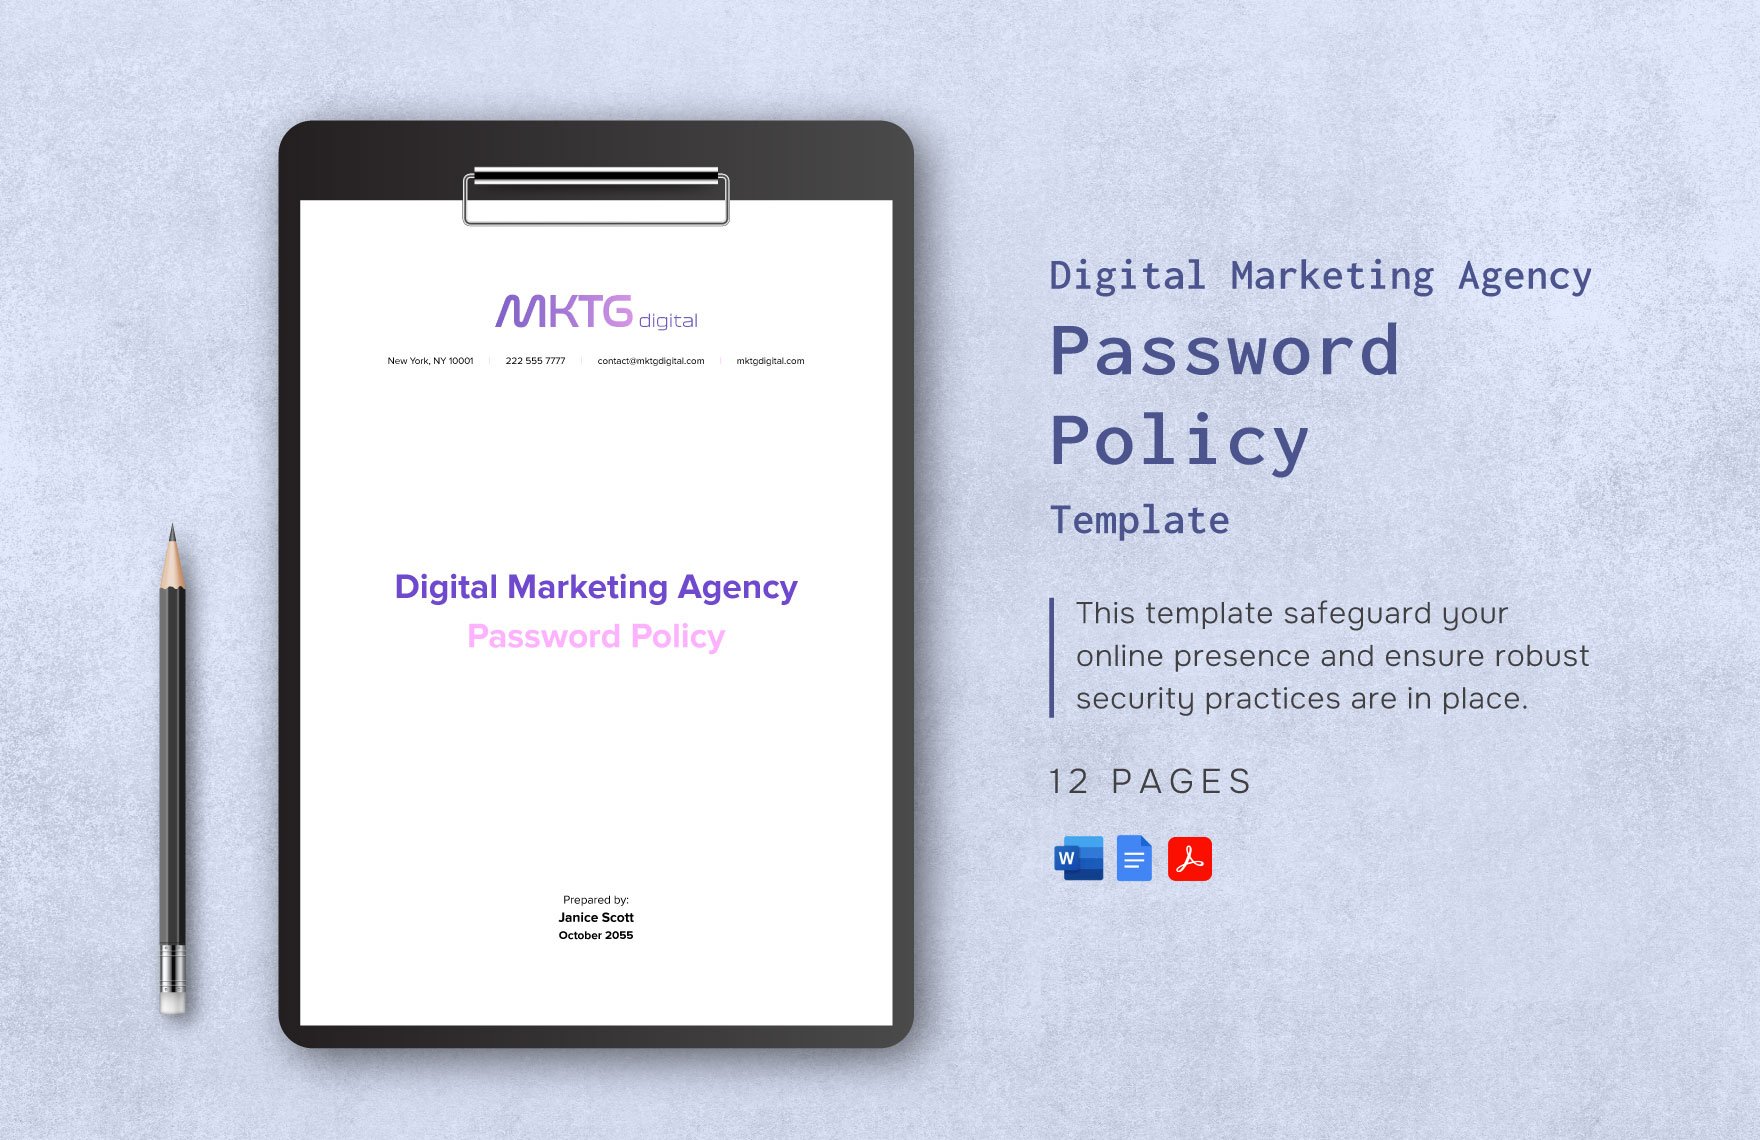 Digital Marketing Agency Password Policy Template